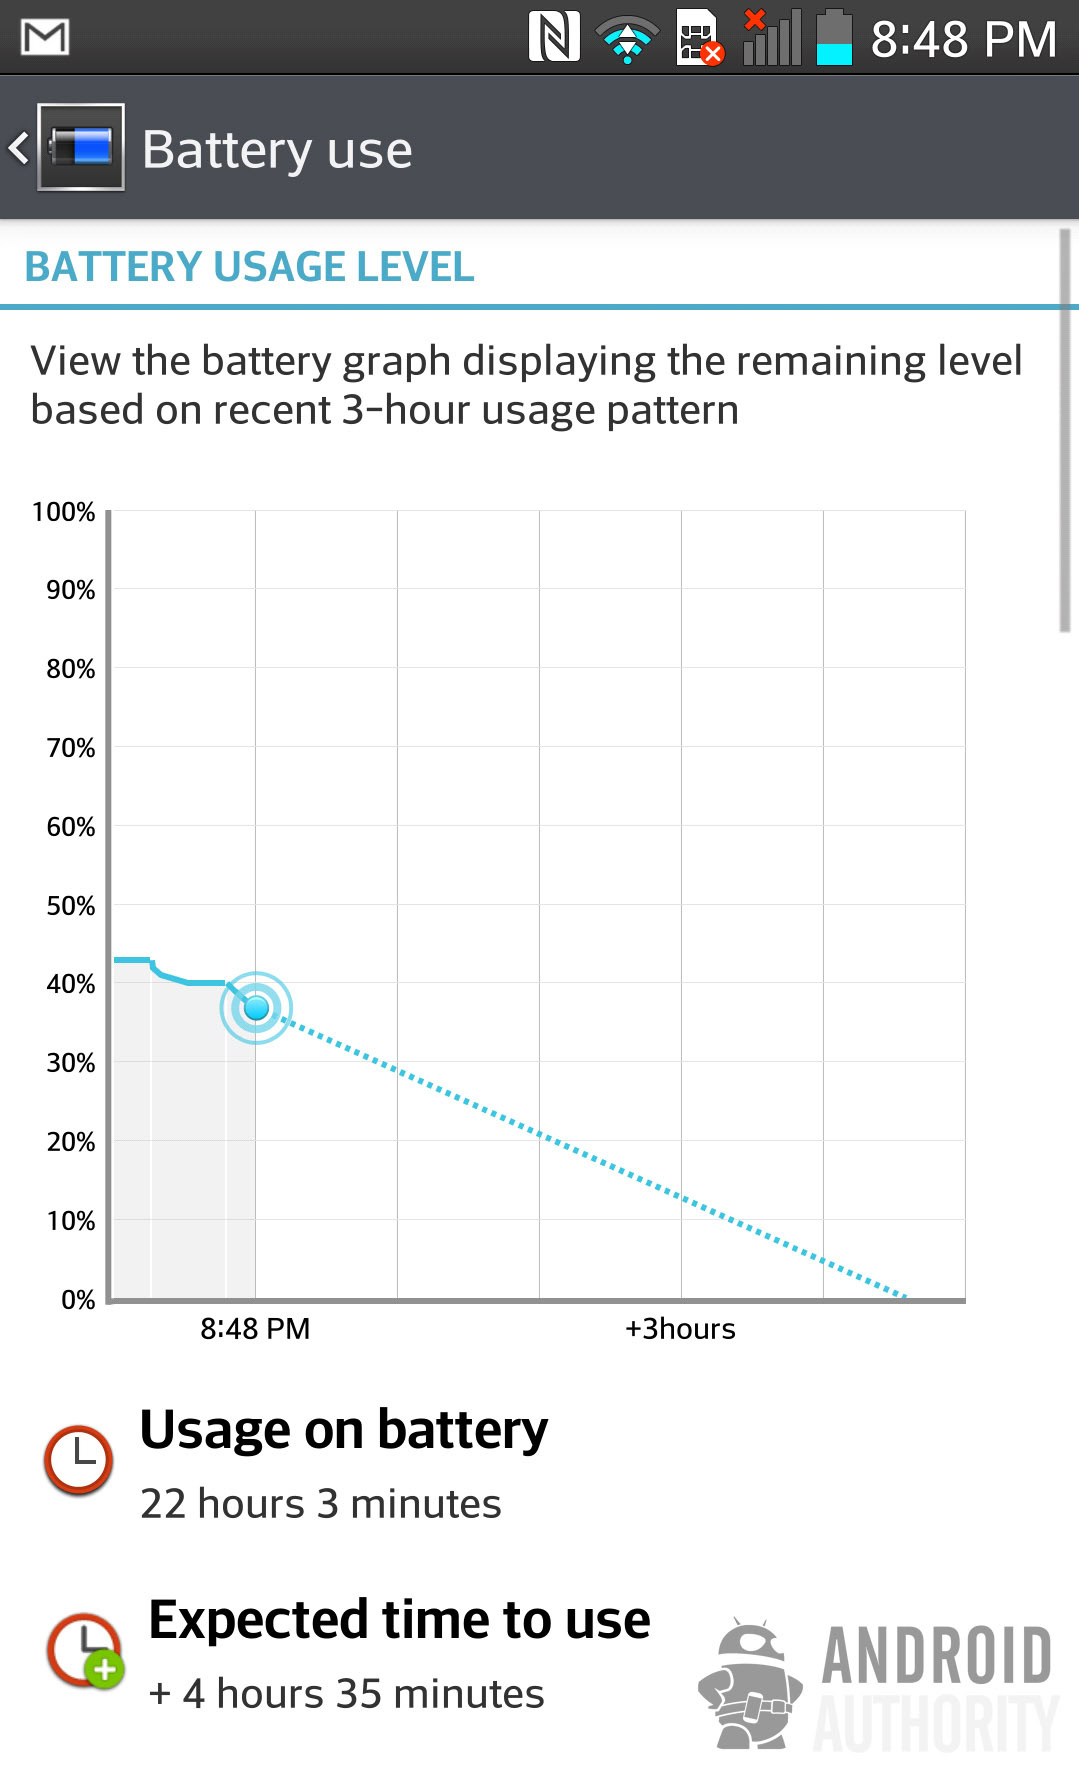 LG G2 Battery Life is excellent AA